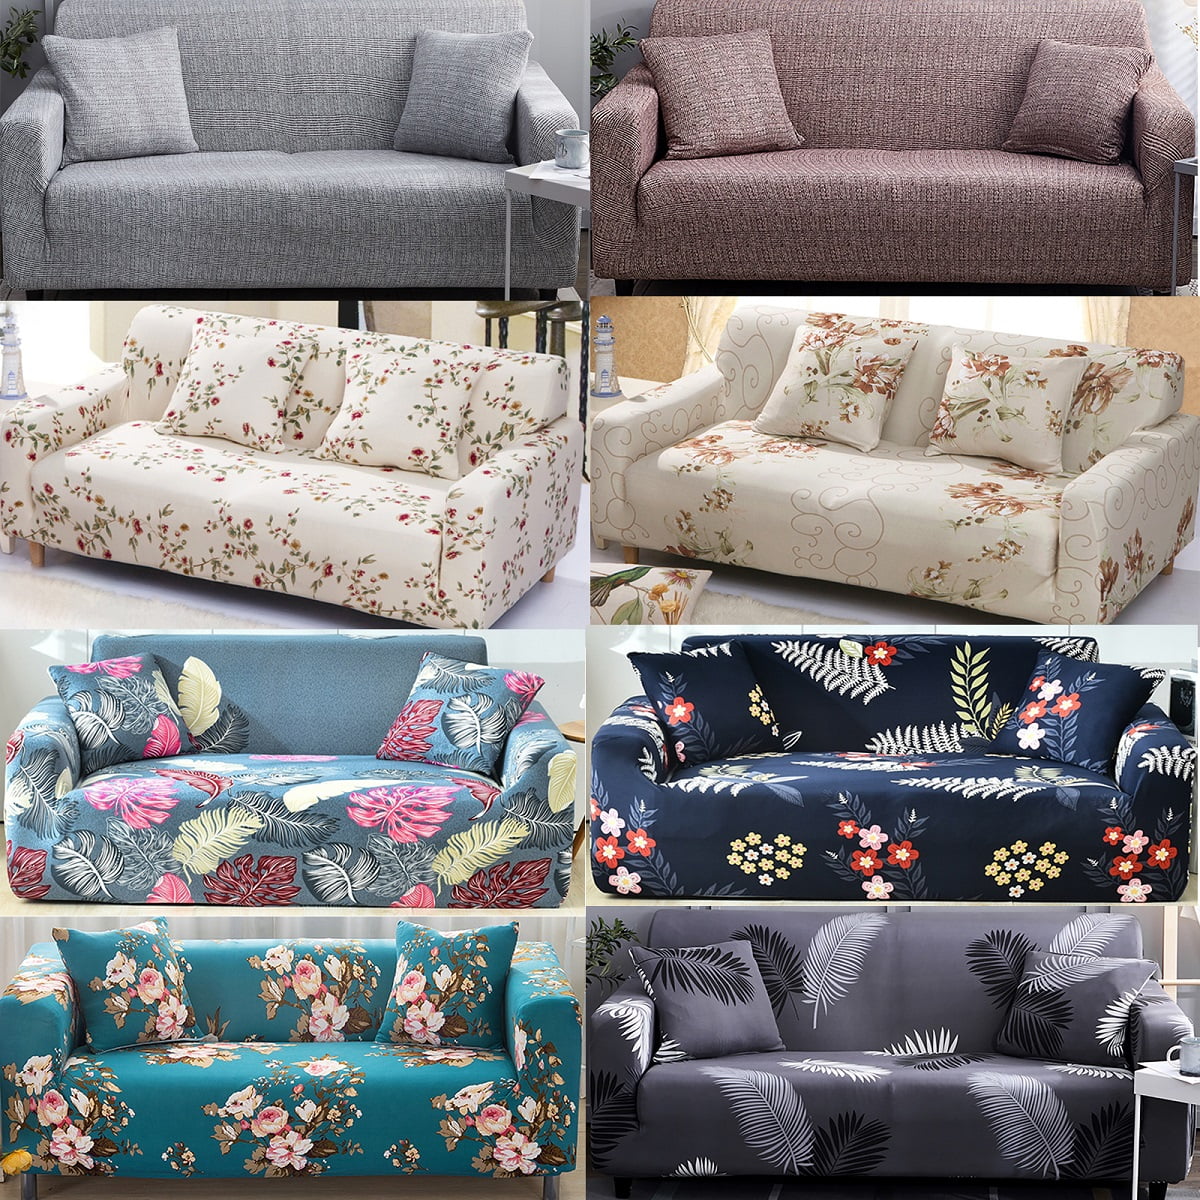 1 2 3 Seater Sofa Cover Slipcover Stretch Elastic Couch Home Furniture Protector 